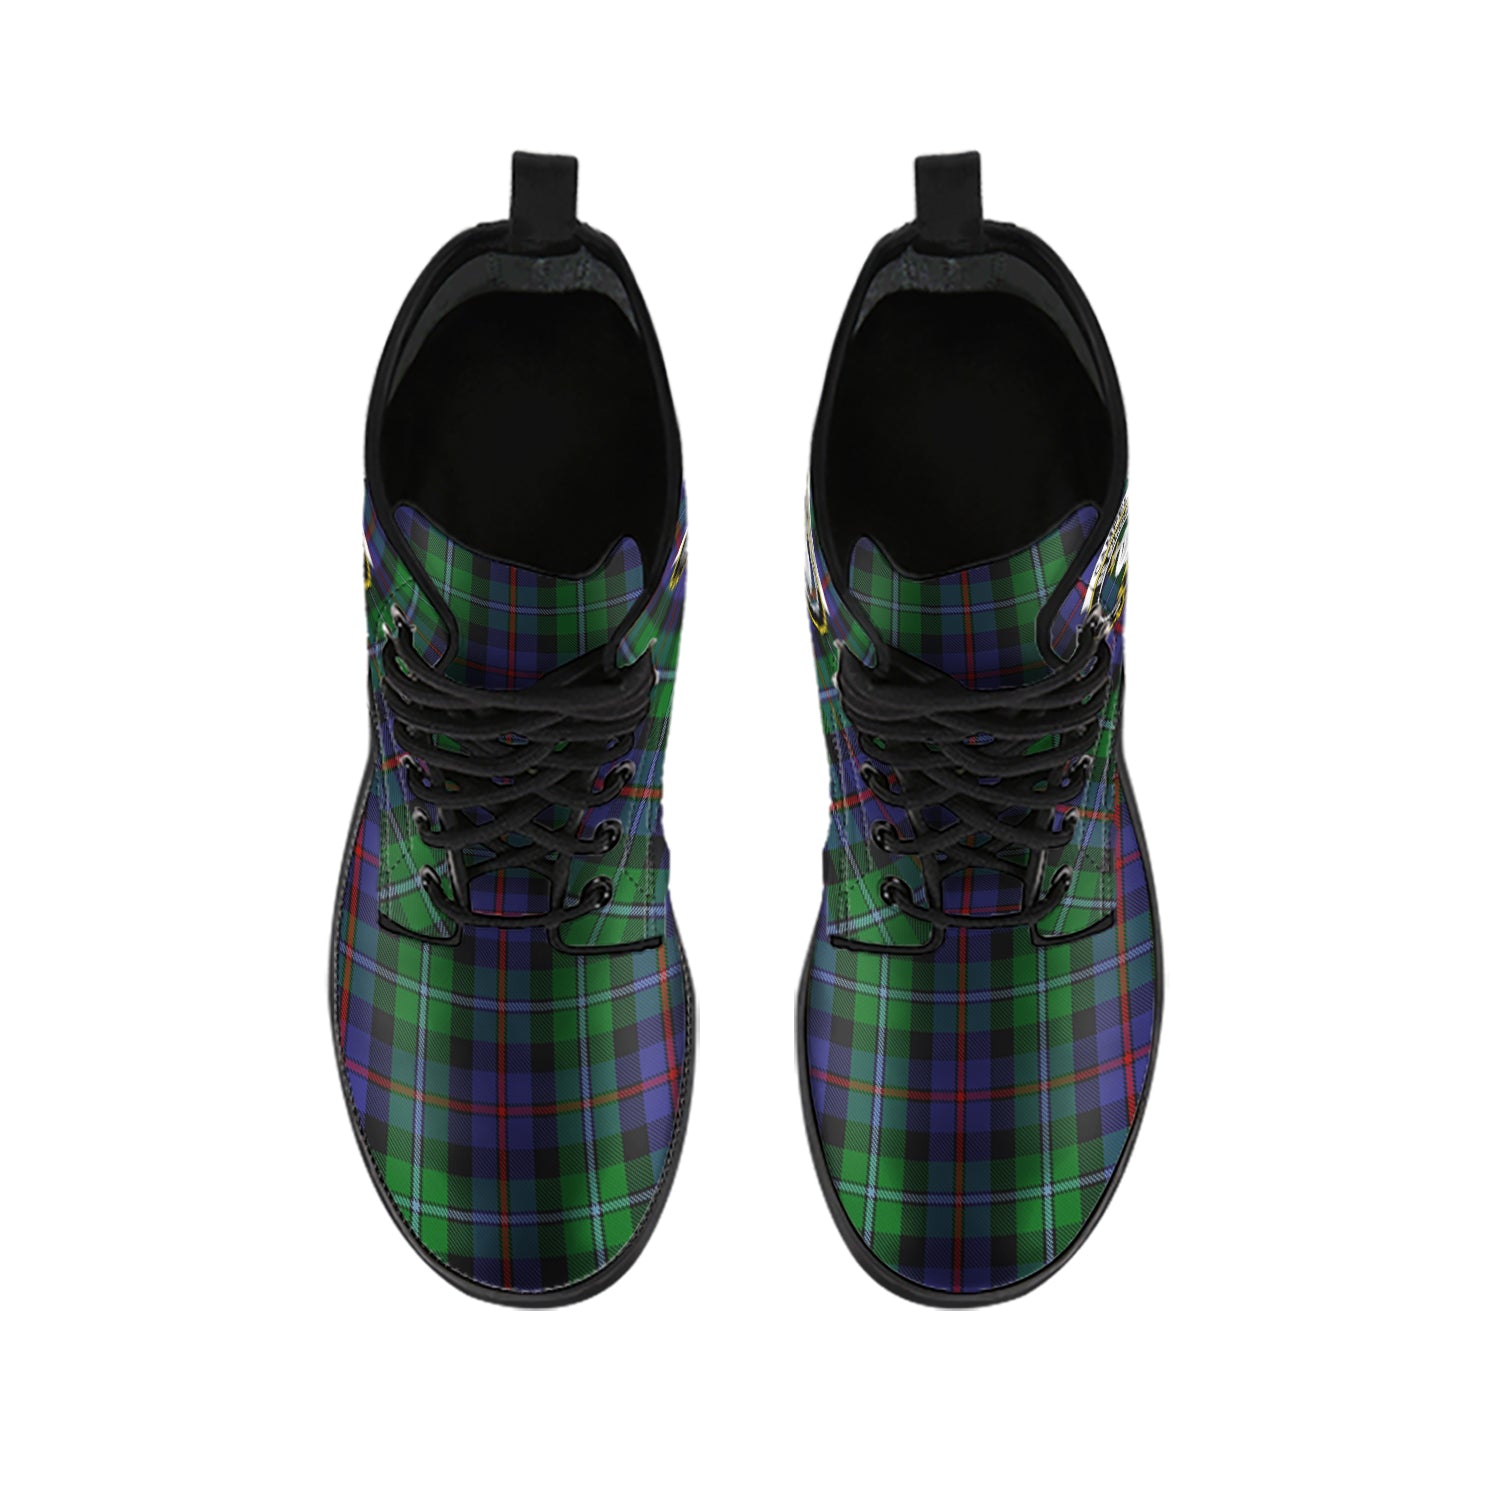 campbell-of-cawdor-tartan-leather-boots-with-family-crest